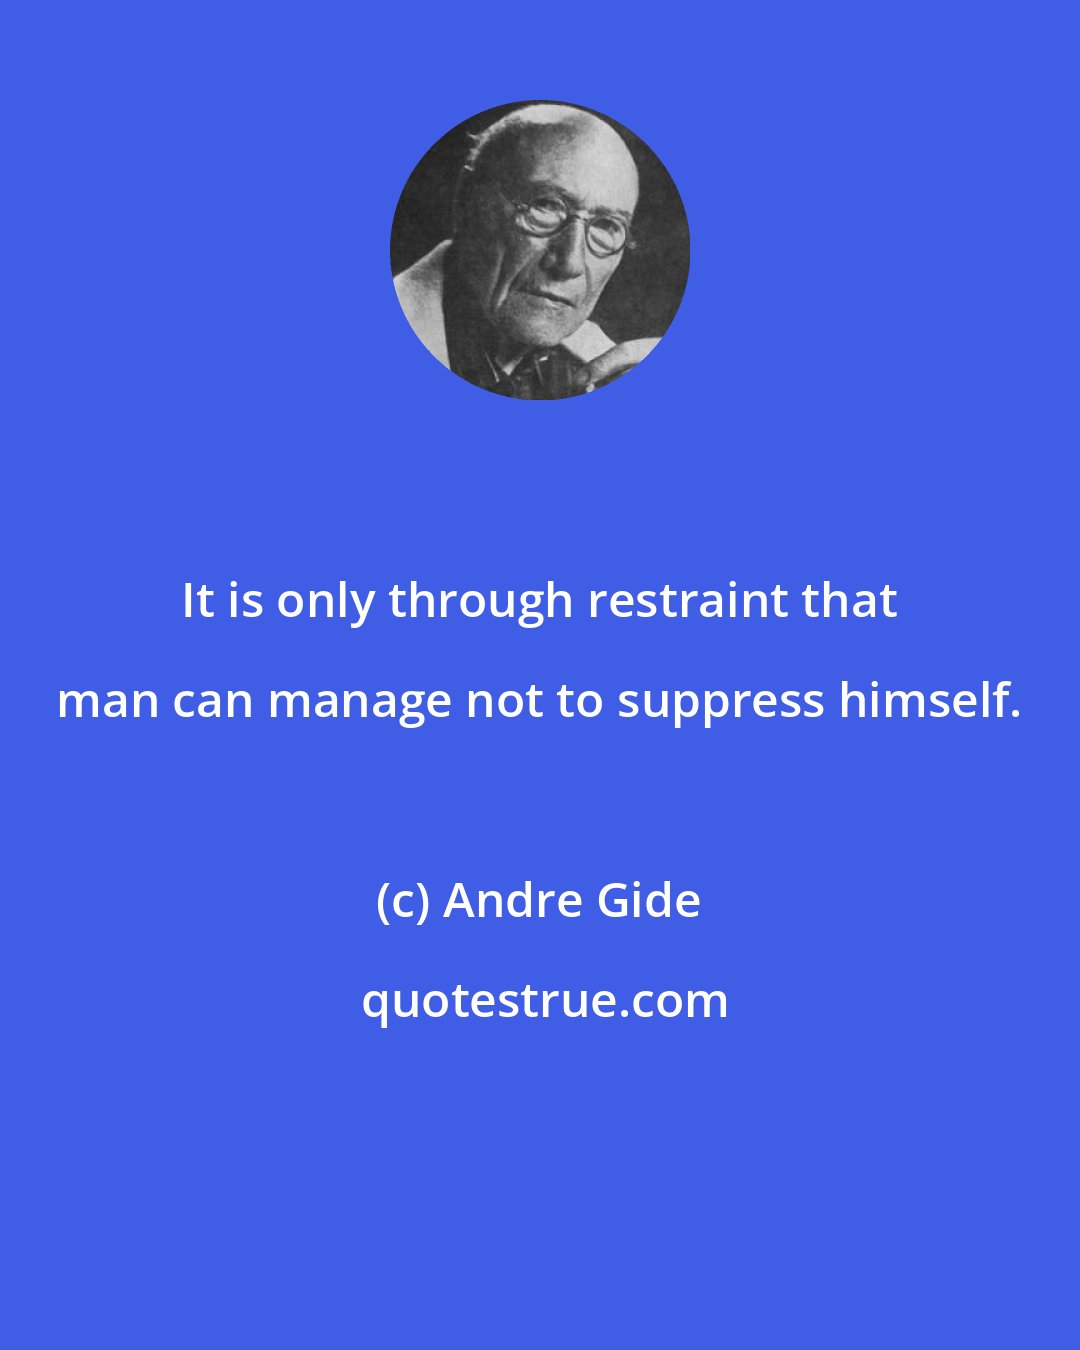 Andre Gide: It is only through restraint that man can manage not to suppress himself.